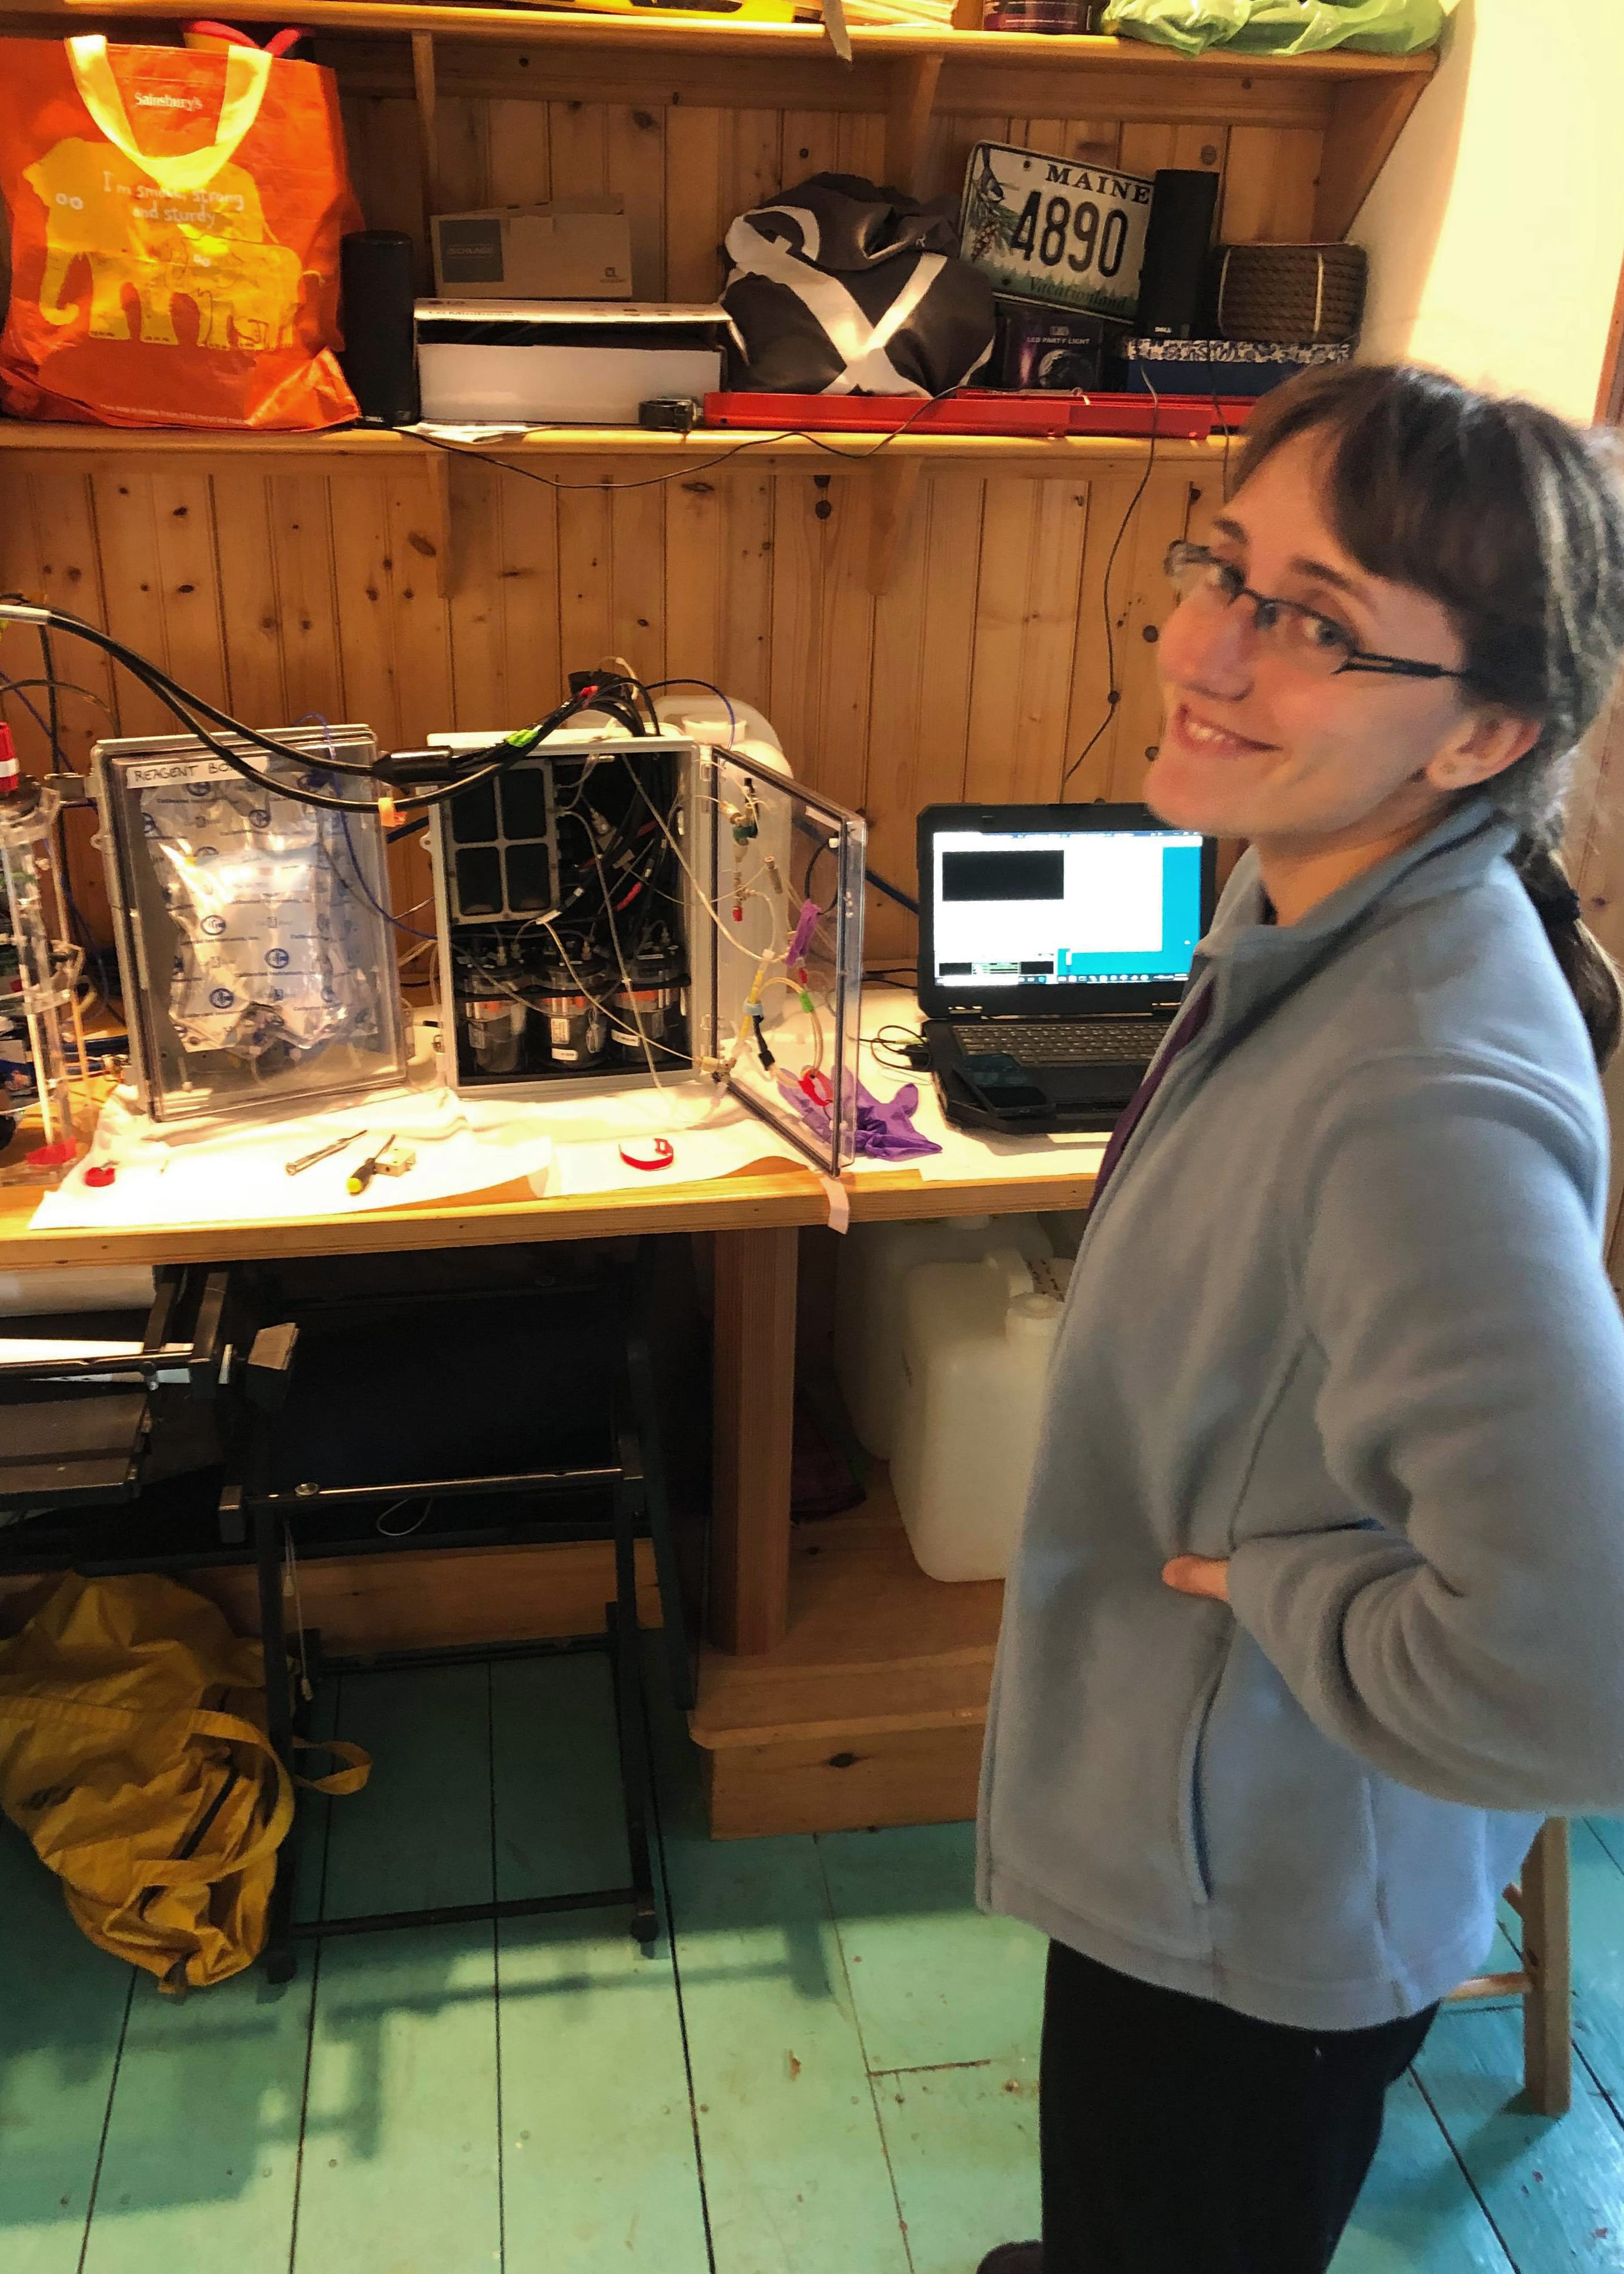 Mallory Ringham poses next to a disassembled CHANOS II, staged in her ersatz basement lab at her home in New York following stay-at-home orders. (Photo by Julia Middleton, © Woods Hole Oceanographic Institution)